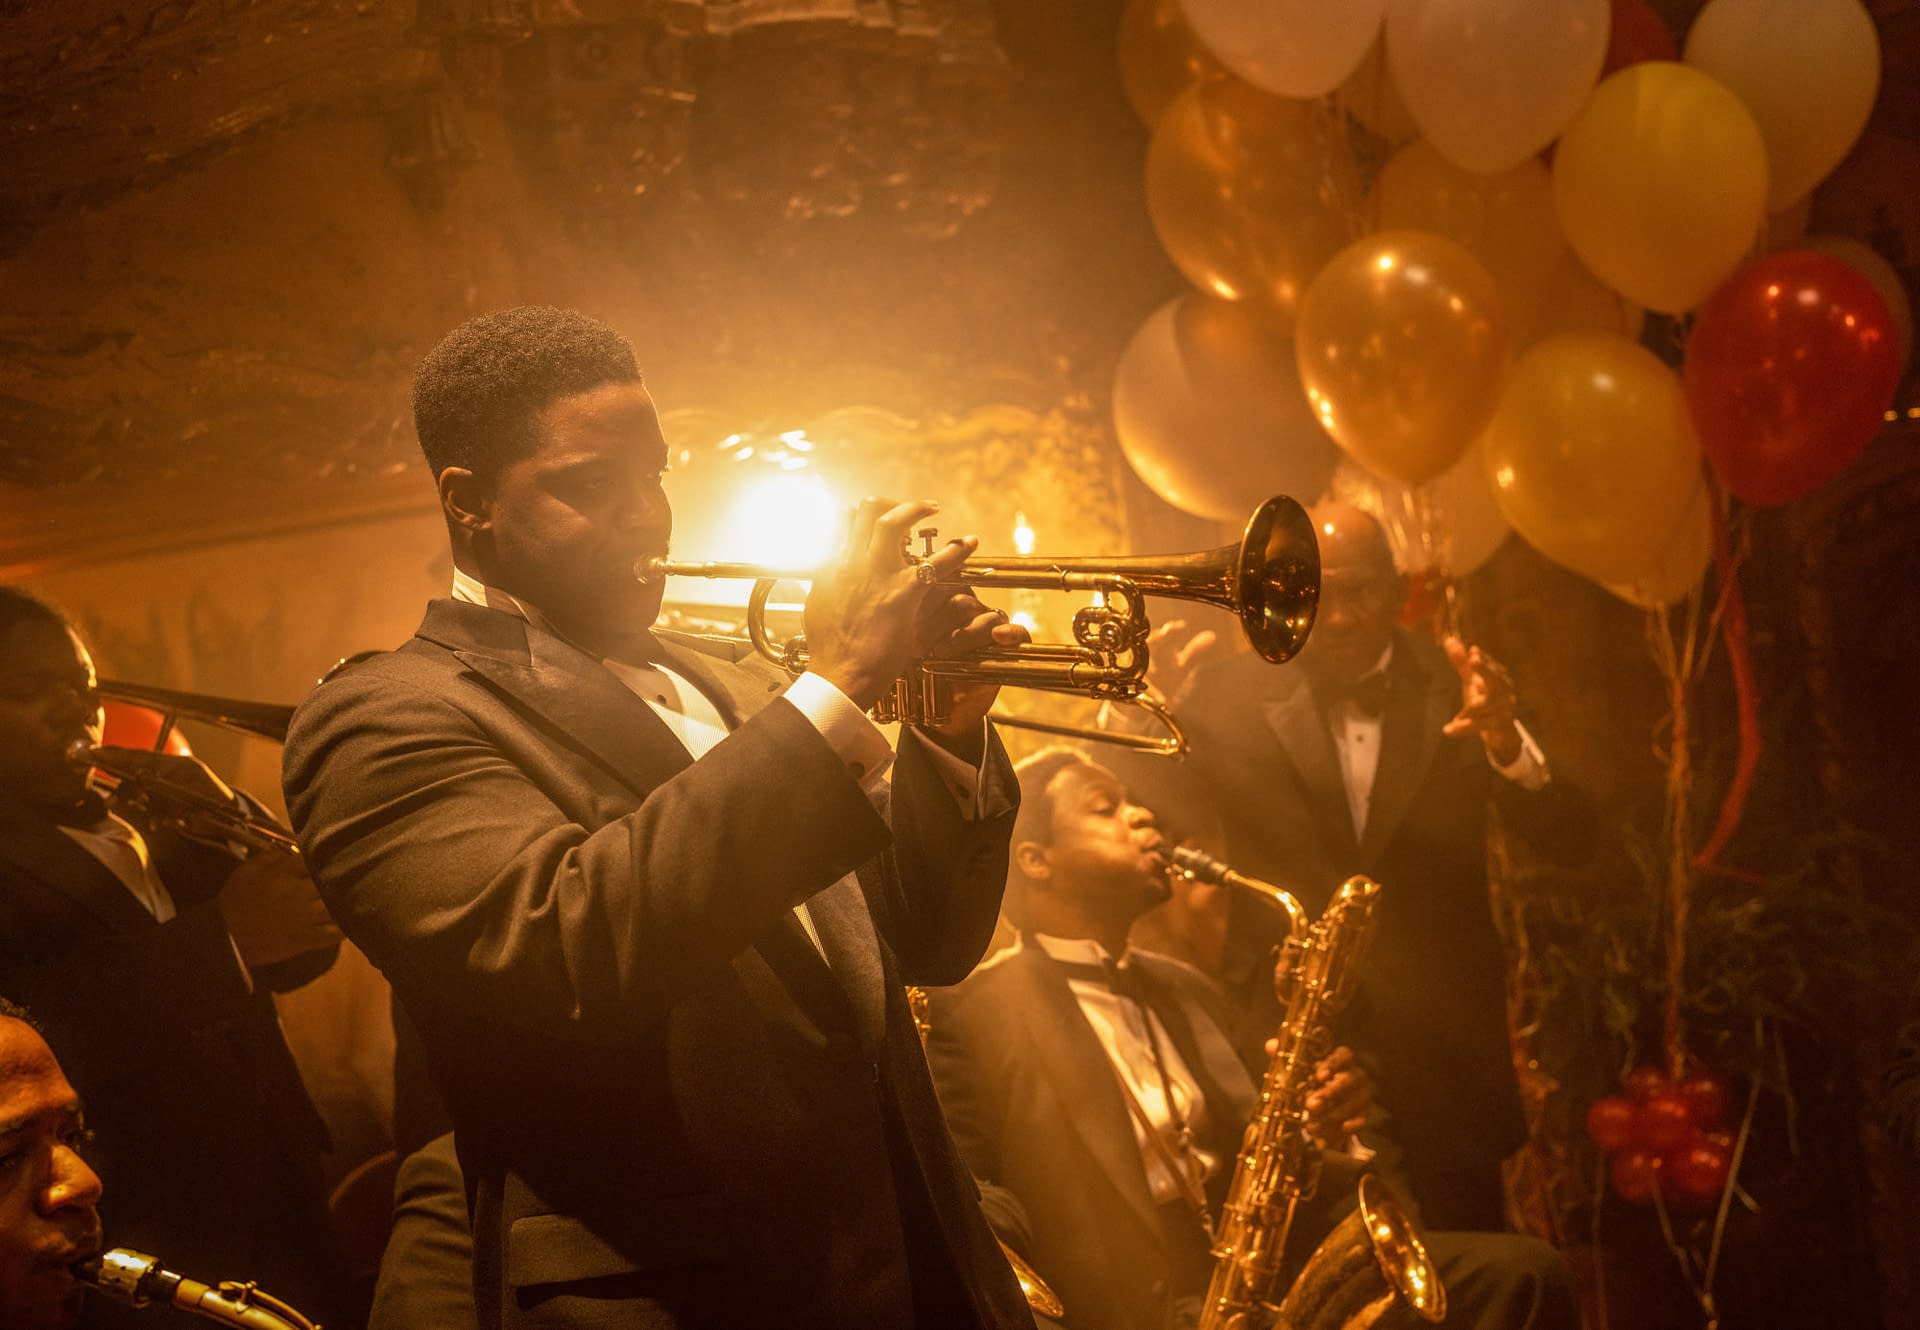 Babylon: New Images From Damien Chazelle's New Film Are Here